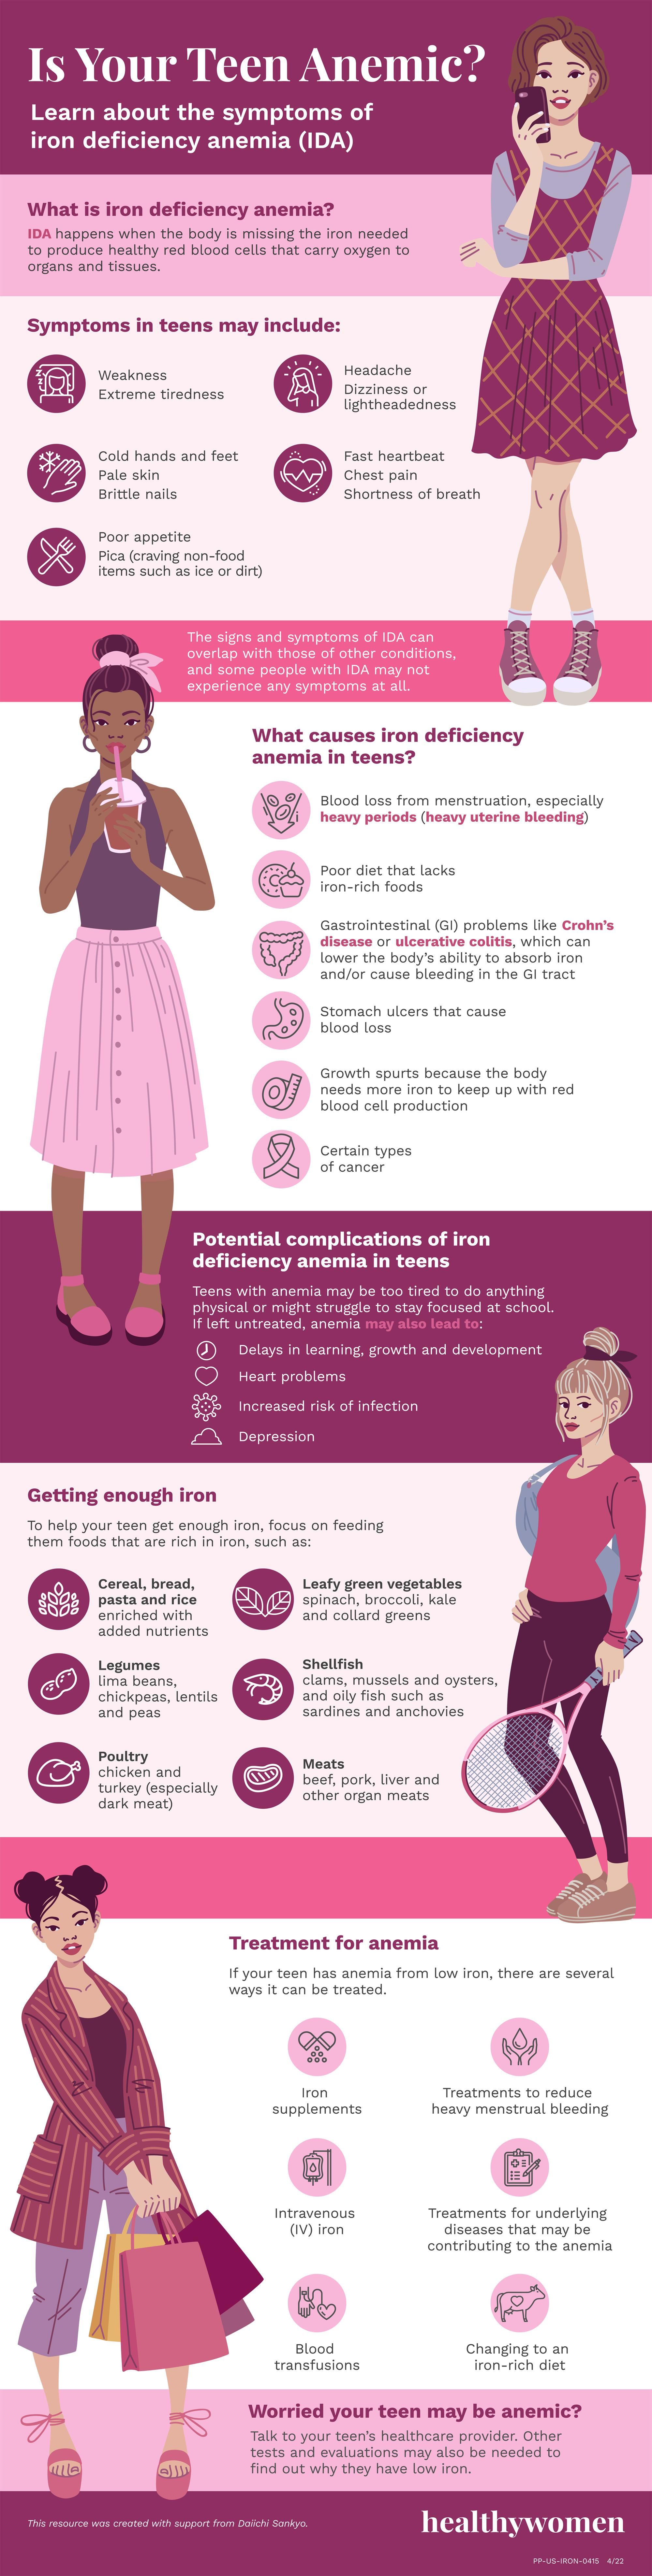 Infographic Is Your Teen Anemic? Click the image to open the PDF